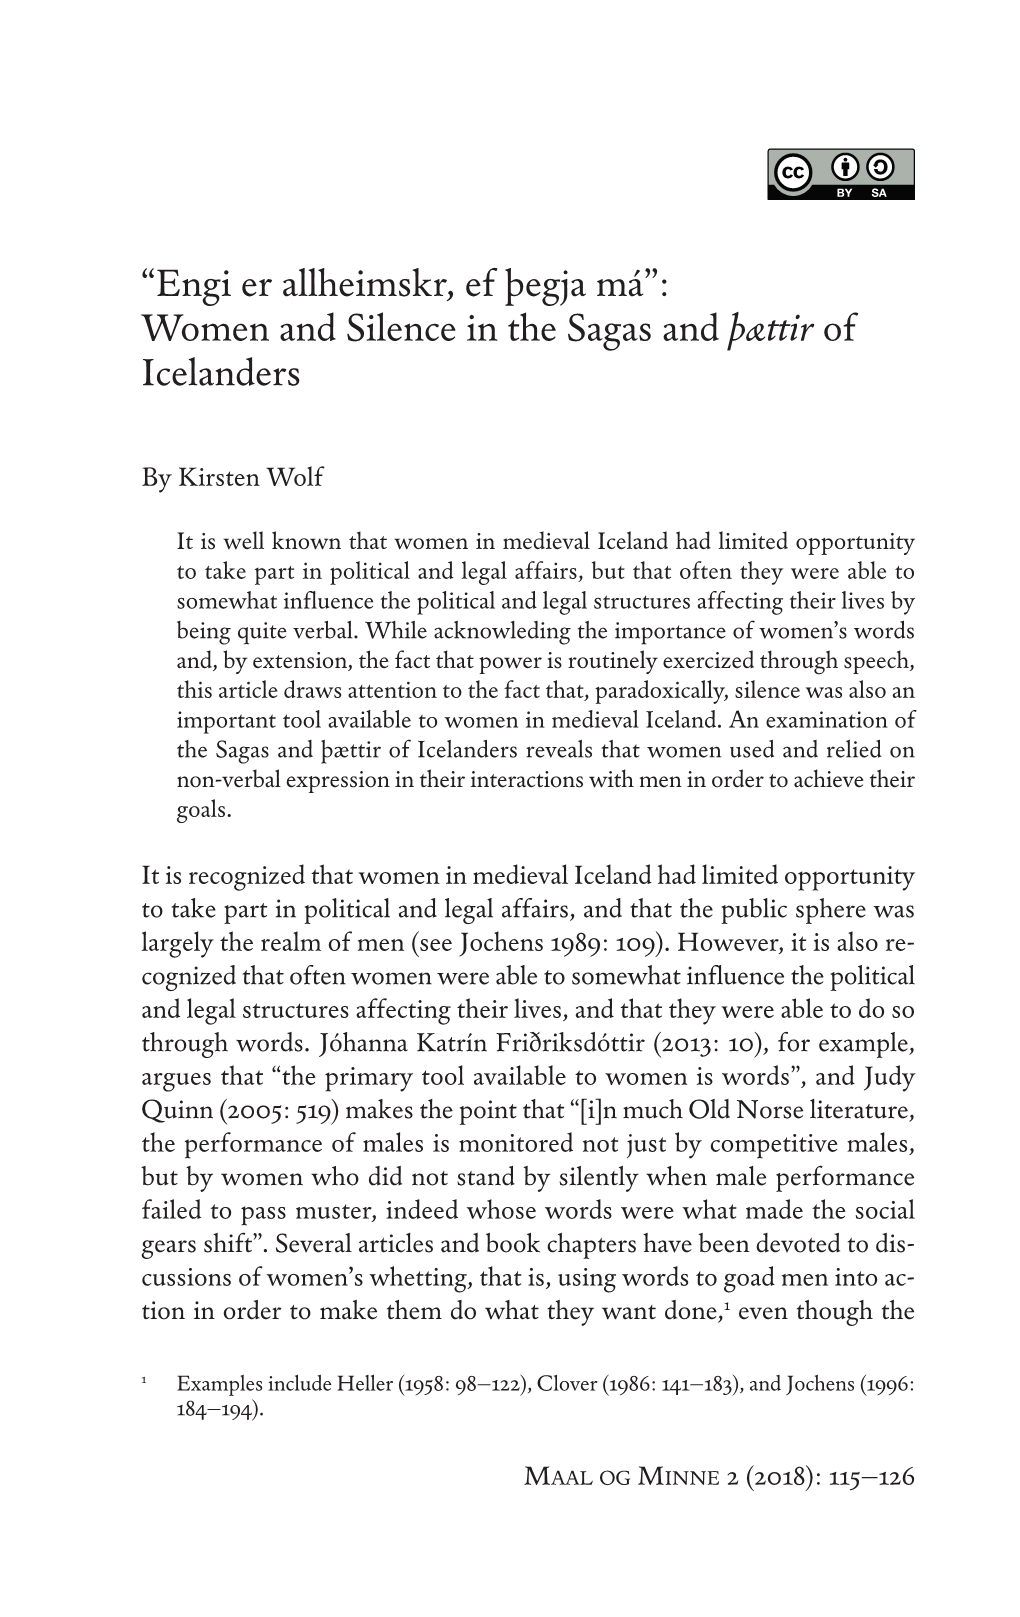 Women and Silence in the Sagas and Þættir of Icelanders